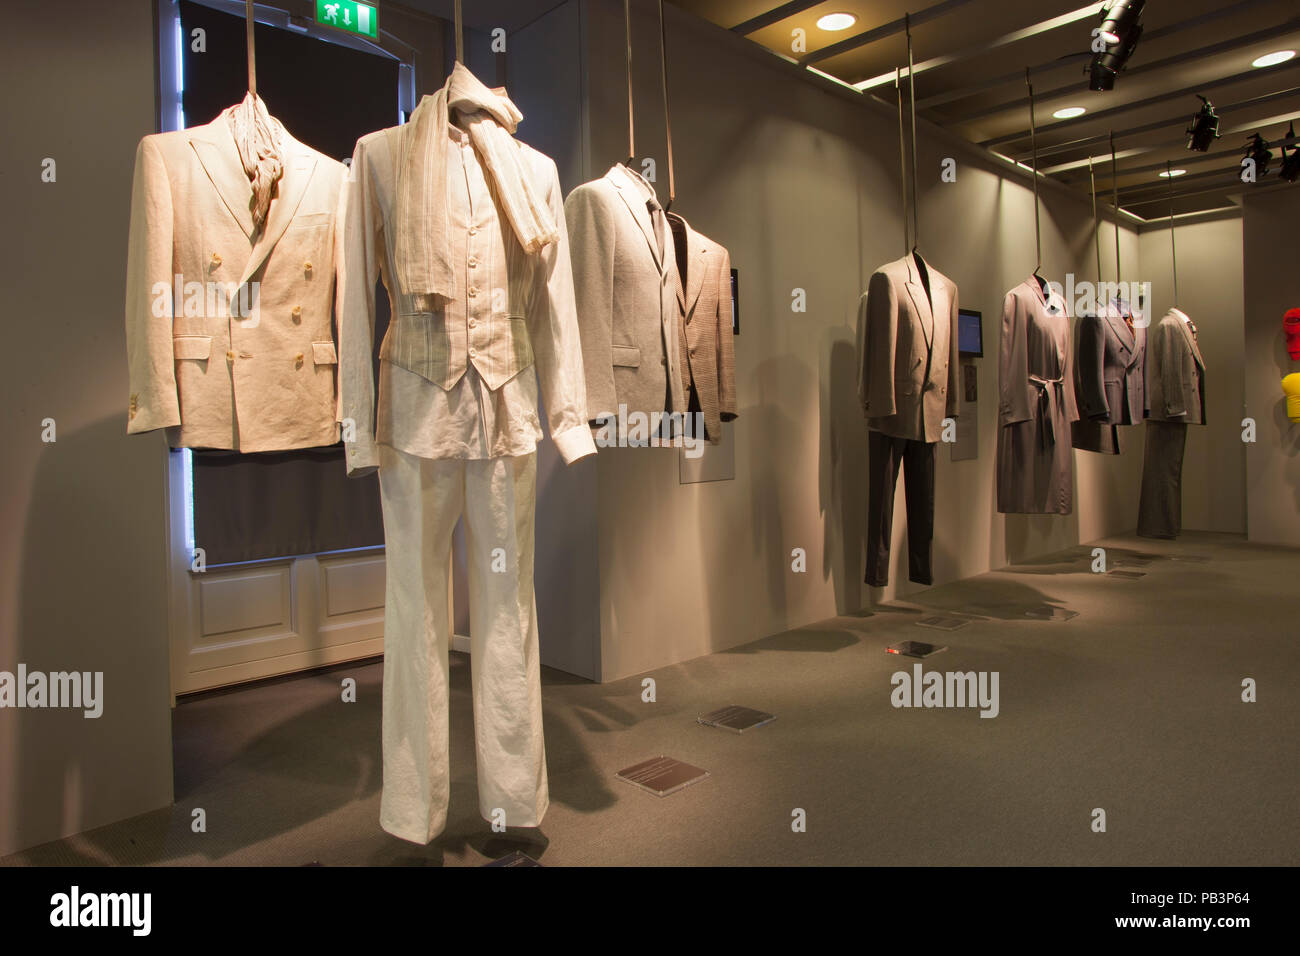 Casa Zegna, part of Fondazione Zegna, exhibition A century of excellence, from textile factory to style factory, part called style, display of suits f Stock Photo